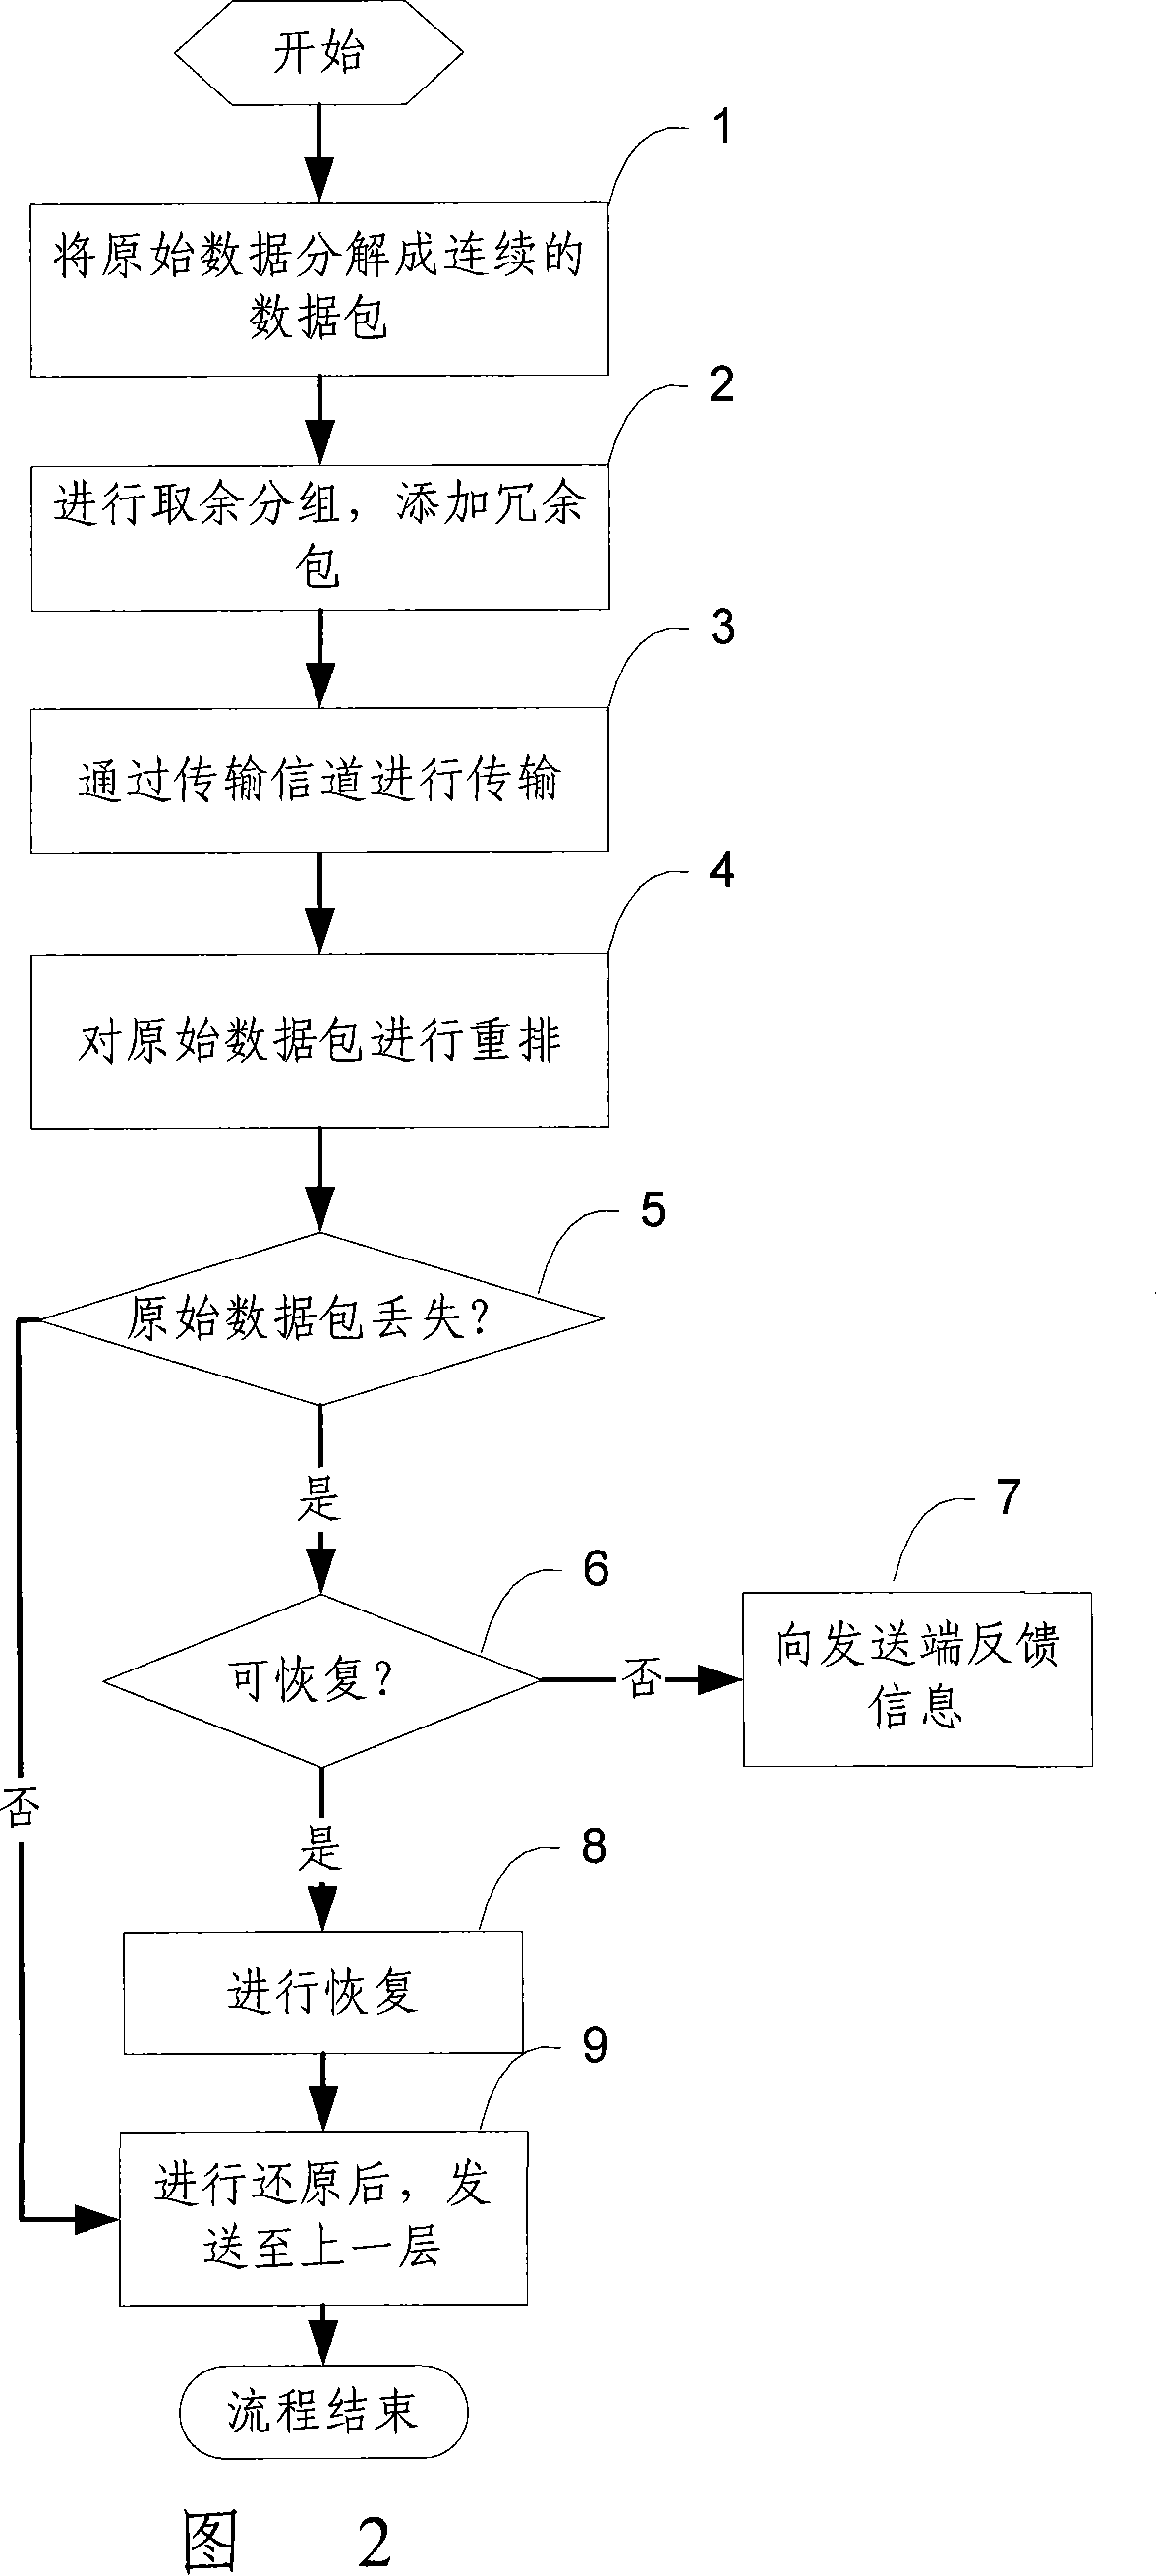 Method, transmitting/receiving device and system against lost packet in data transmission process